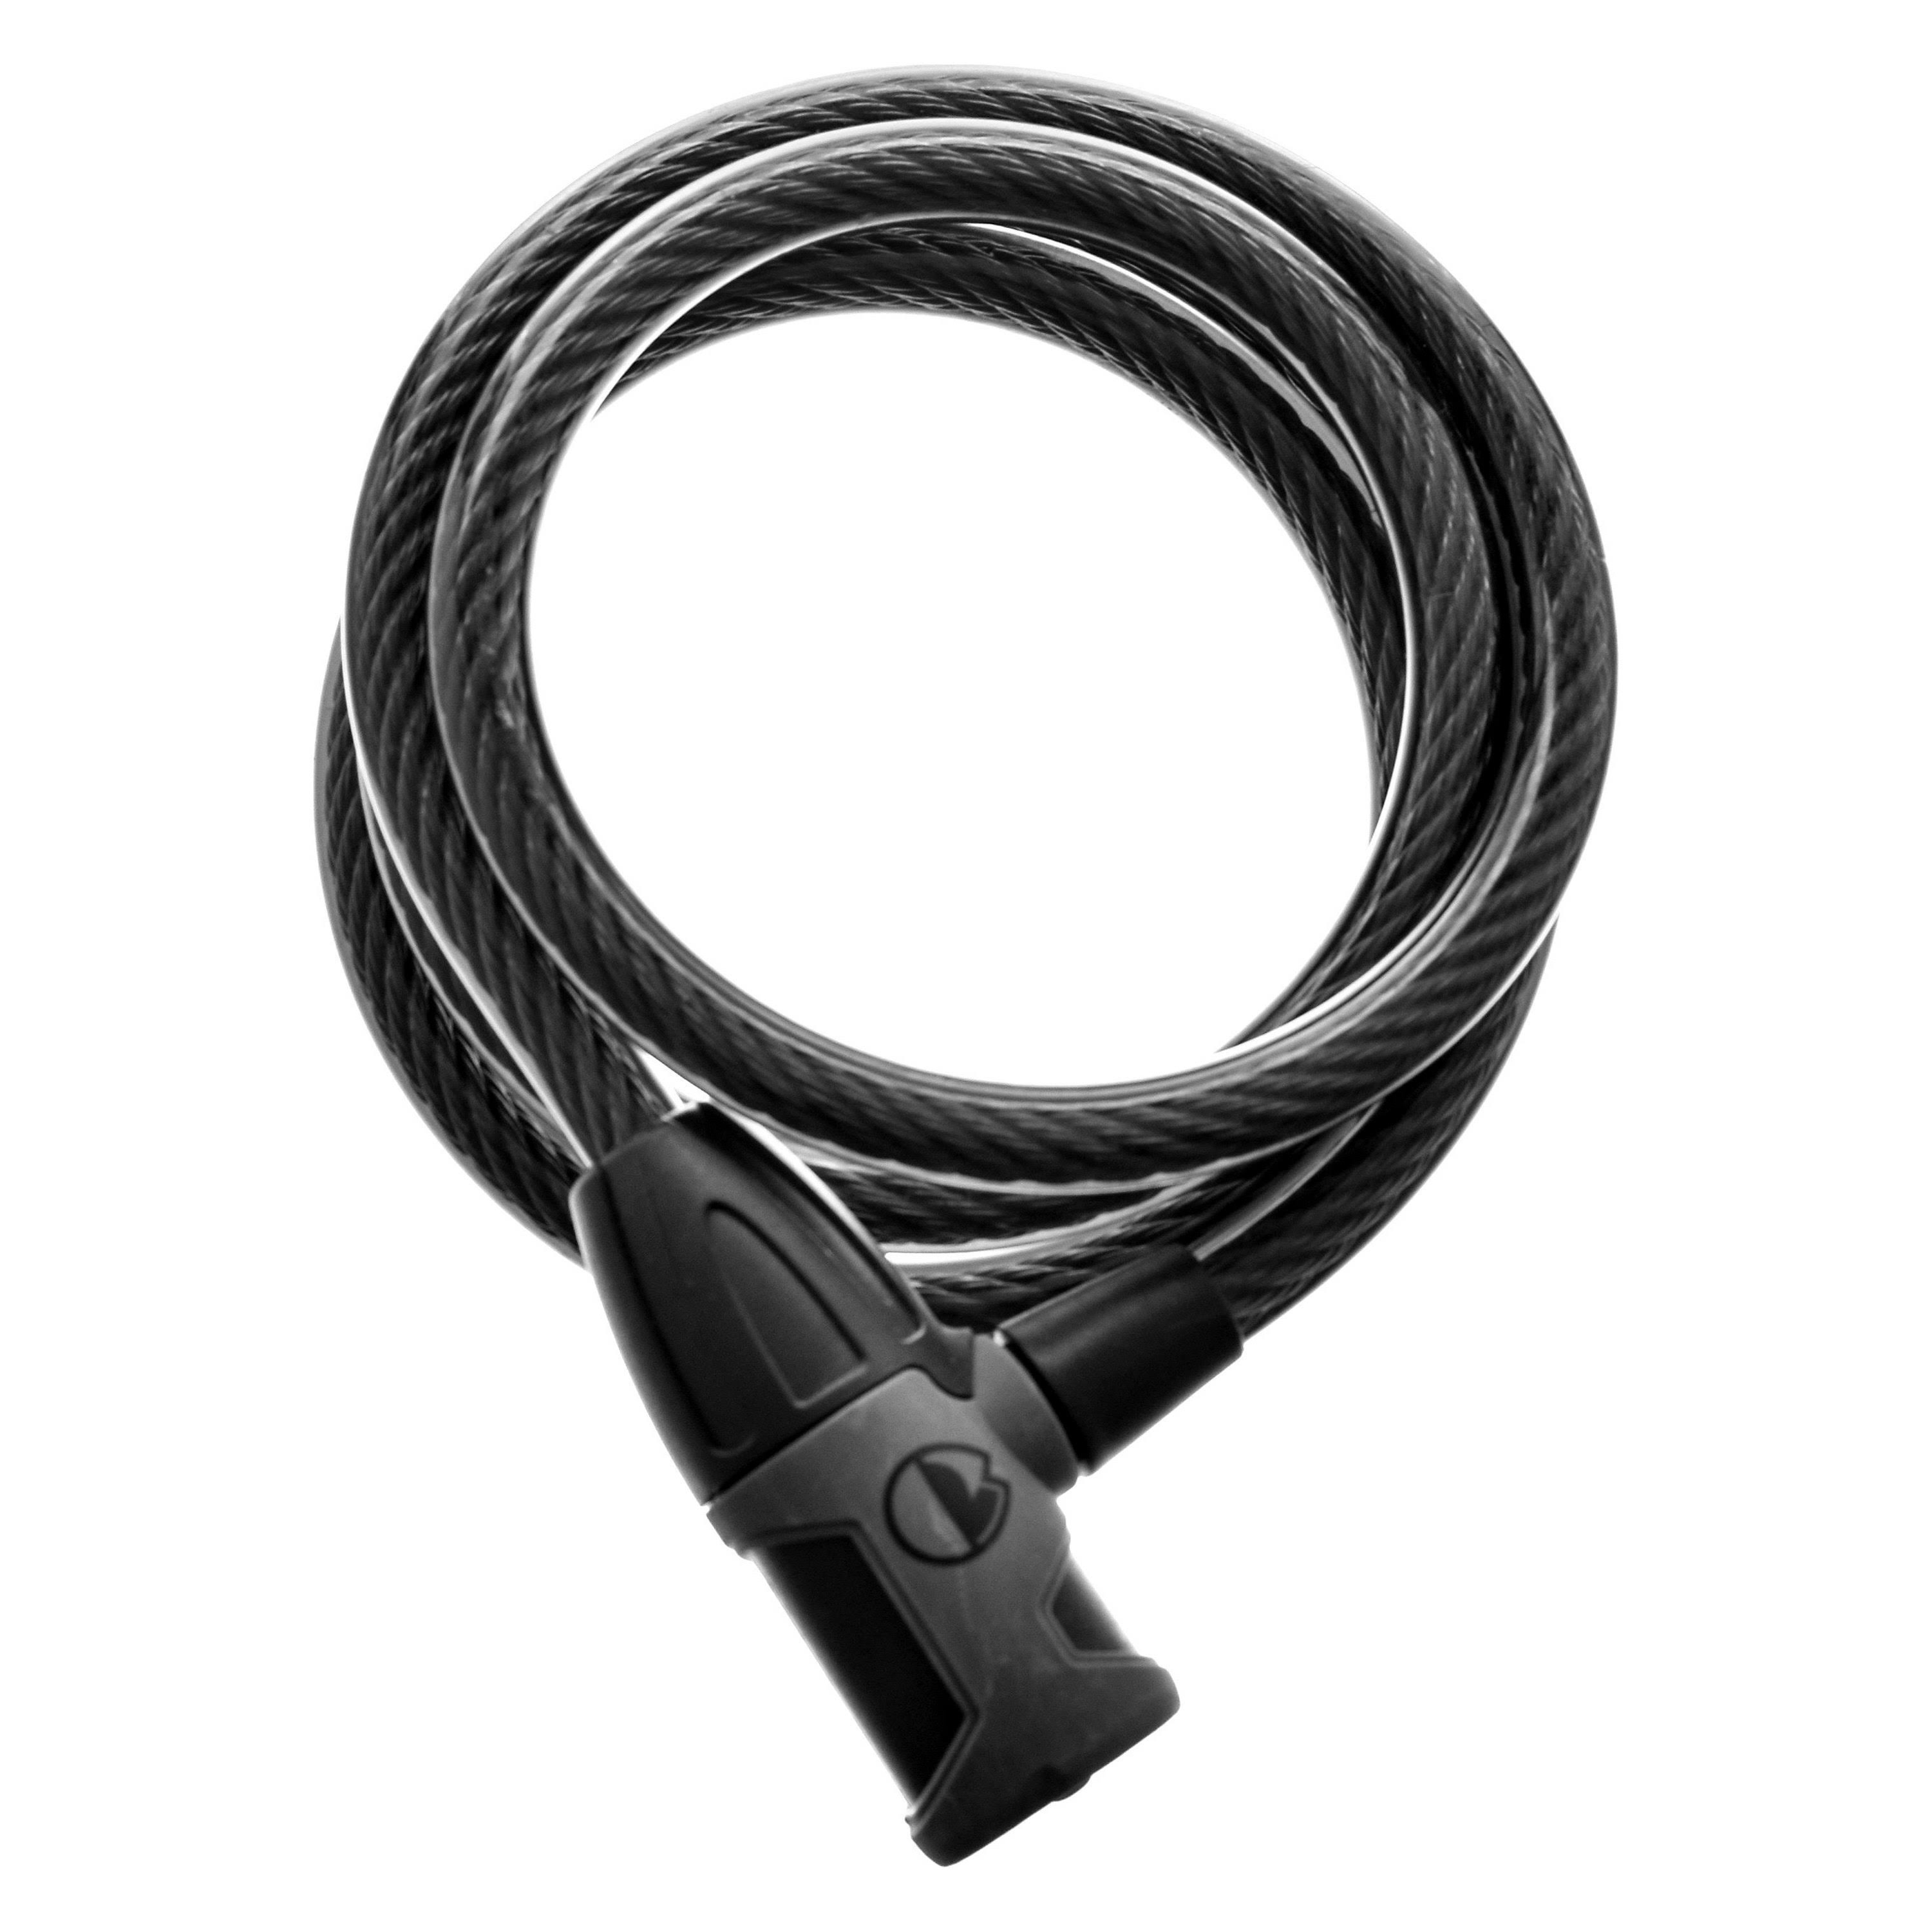 RockyMounts Five-O Straight Up Cable Lock